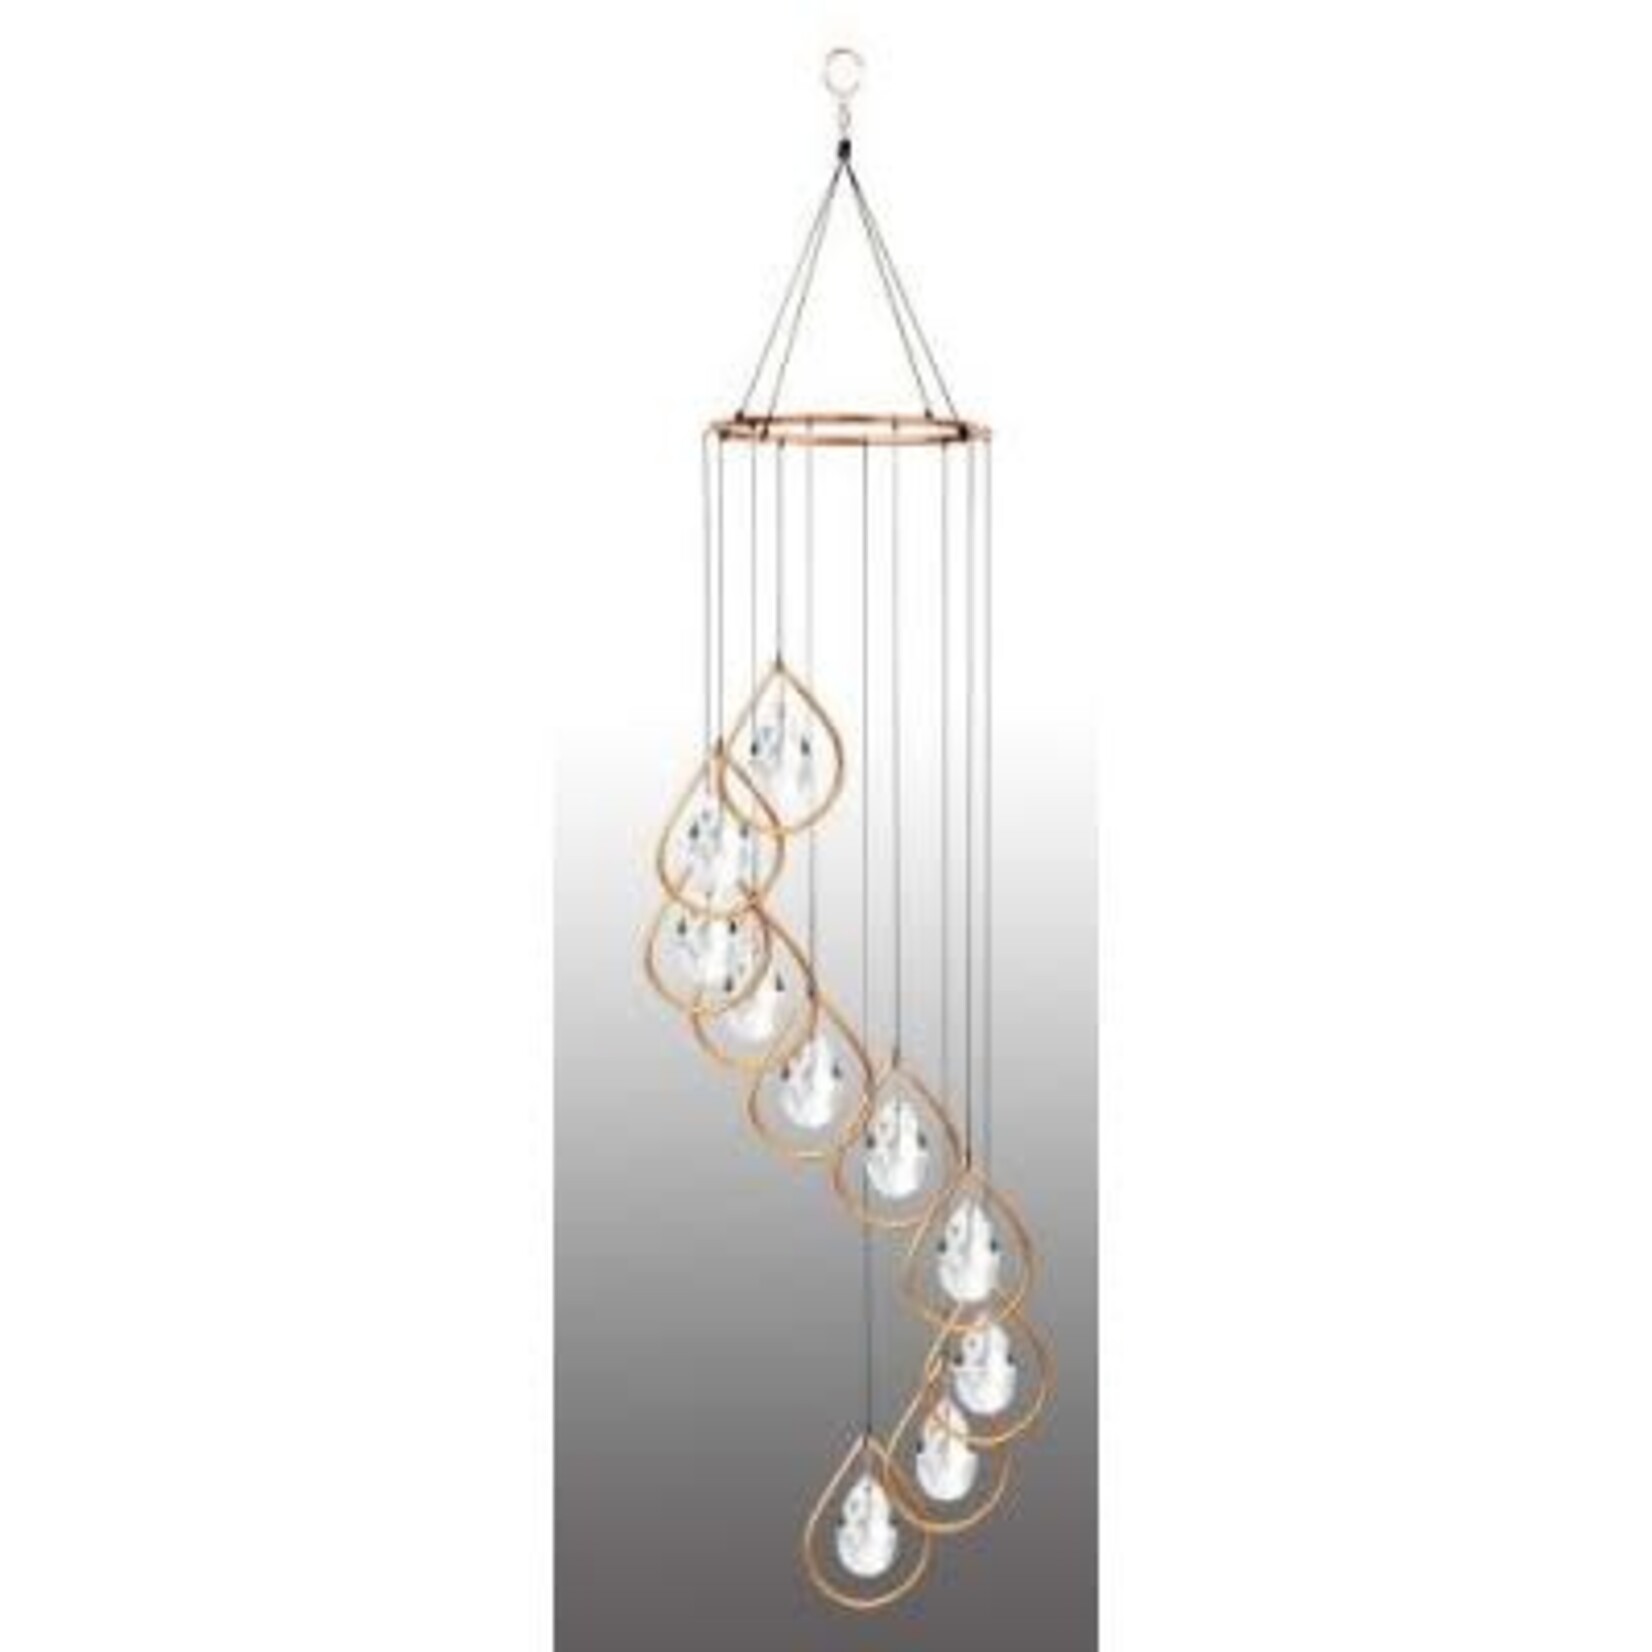 Spiral Tunes Teardrop Ring With Teardrop Crystals Chime (wall A behind chimes)